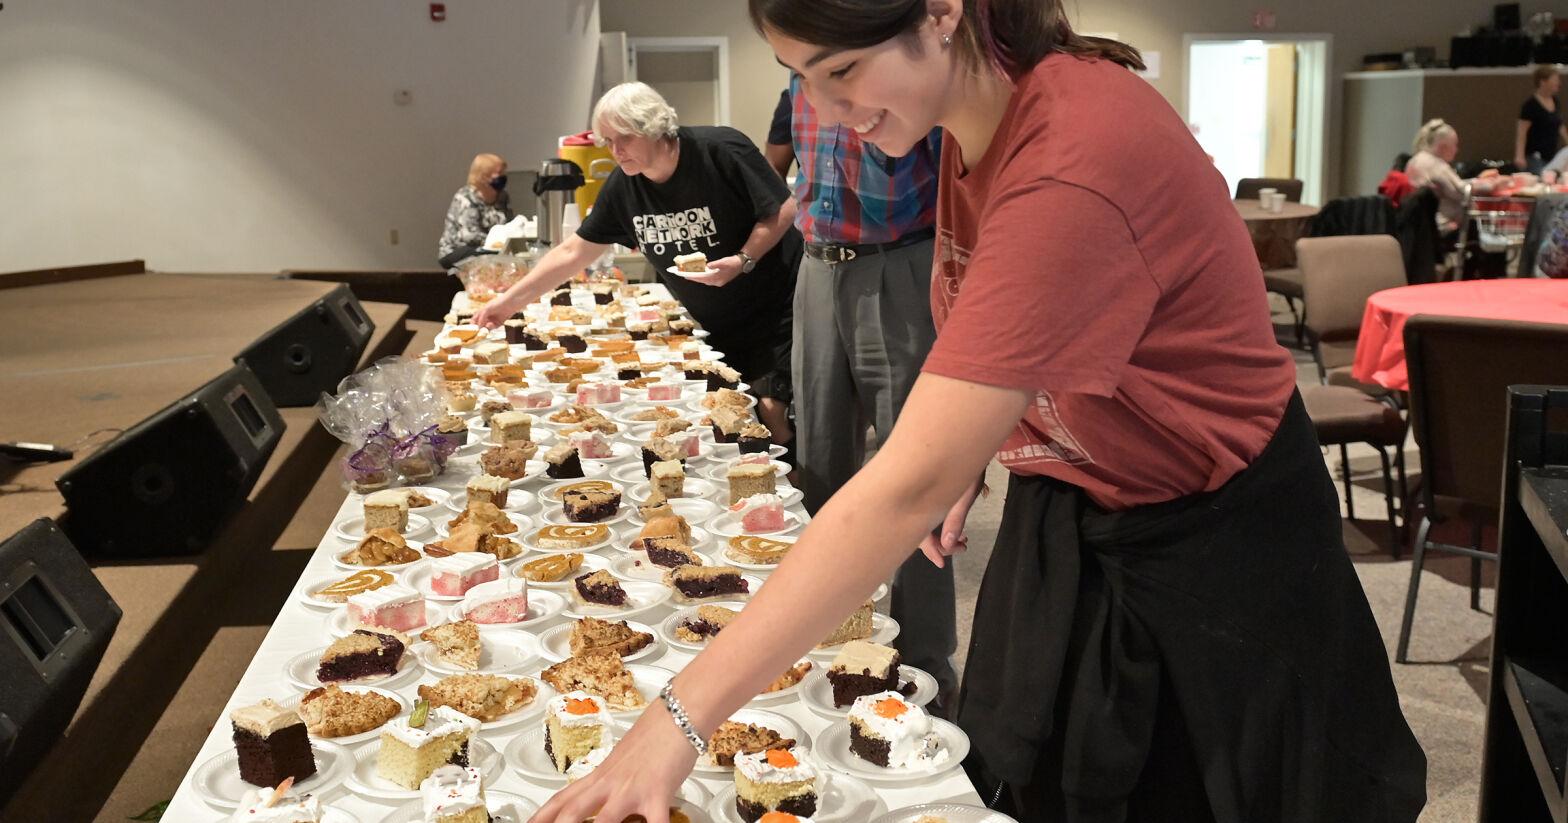 Here's where to get free Thanksgiving meal in Lancaster County 2022 for those in need